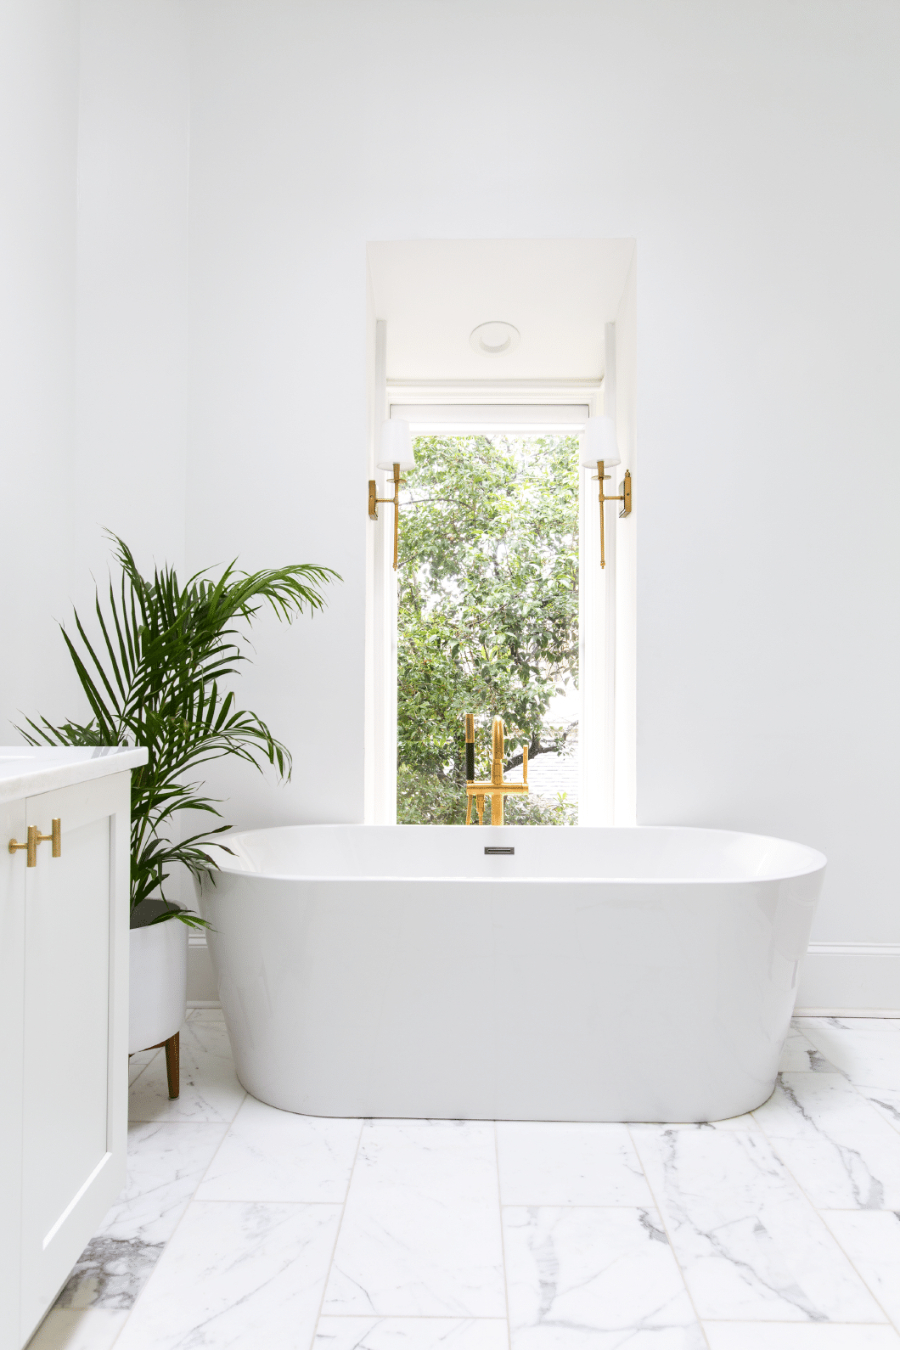 Bathroom Interior Design: Ashton Taylor Interiors. A white bathtub in a overall white design. The furniture and walls are white, and the floor is in white marble.